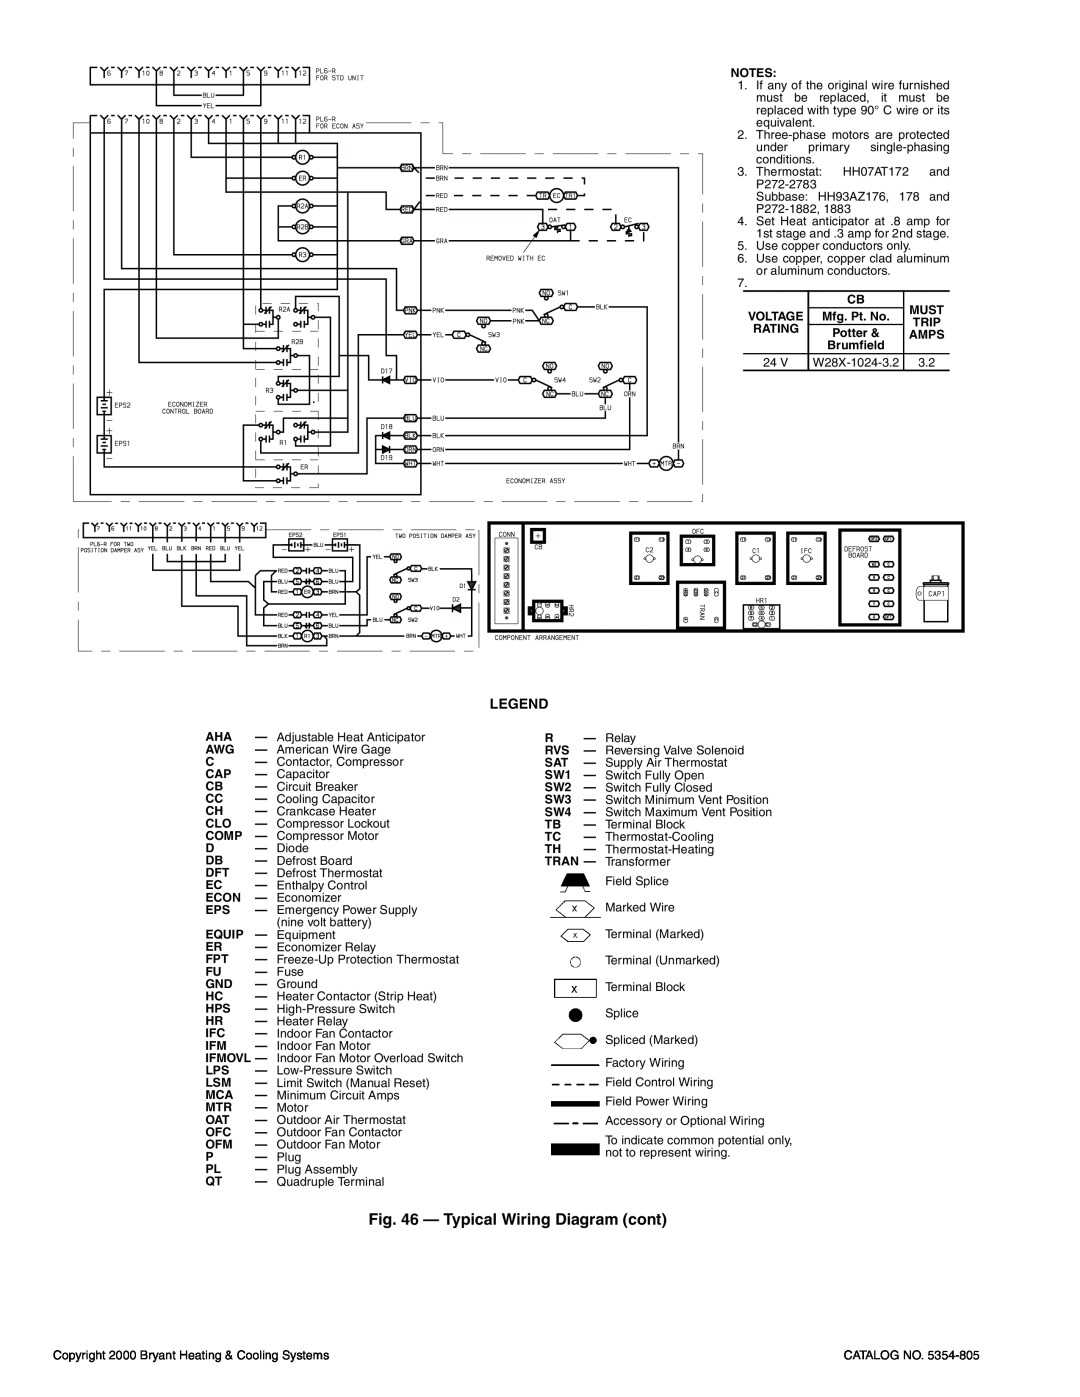 Bryant 548D installation instructions Typical Wiring Diagram cont 